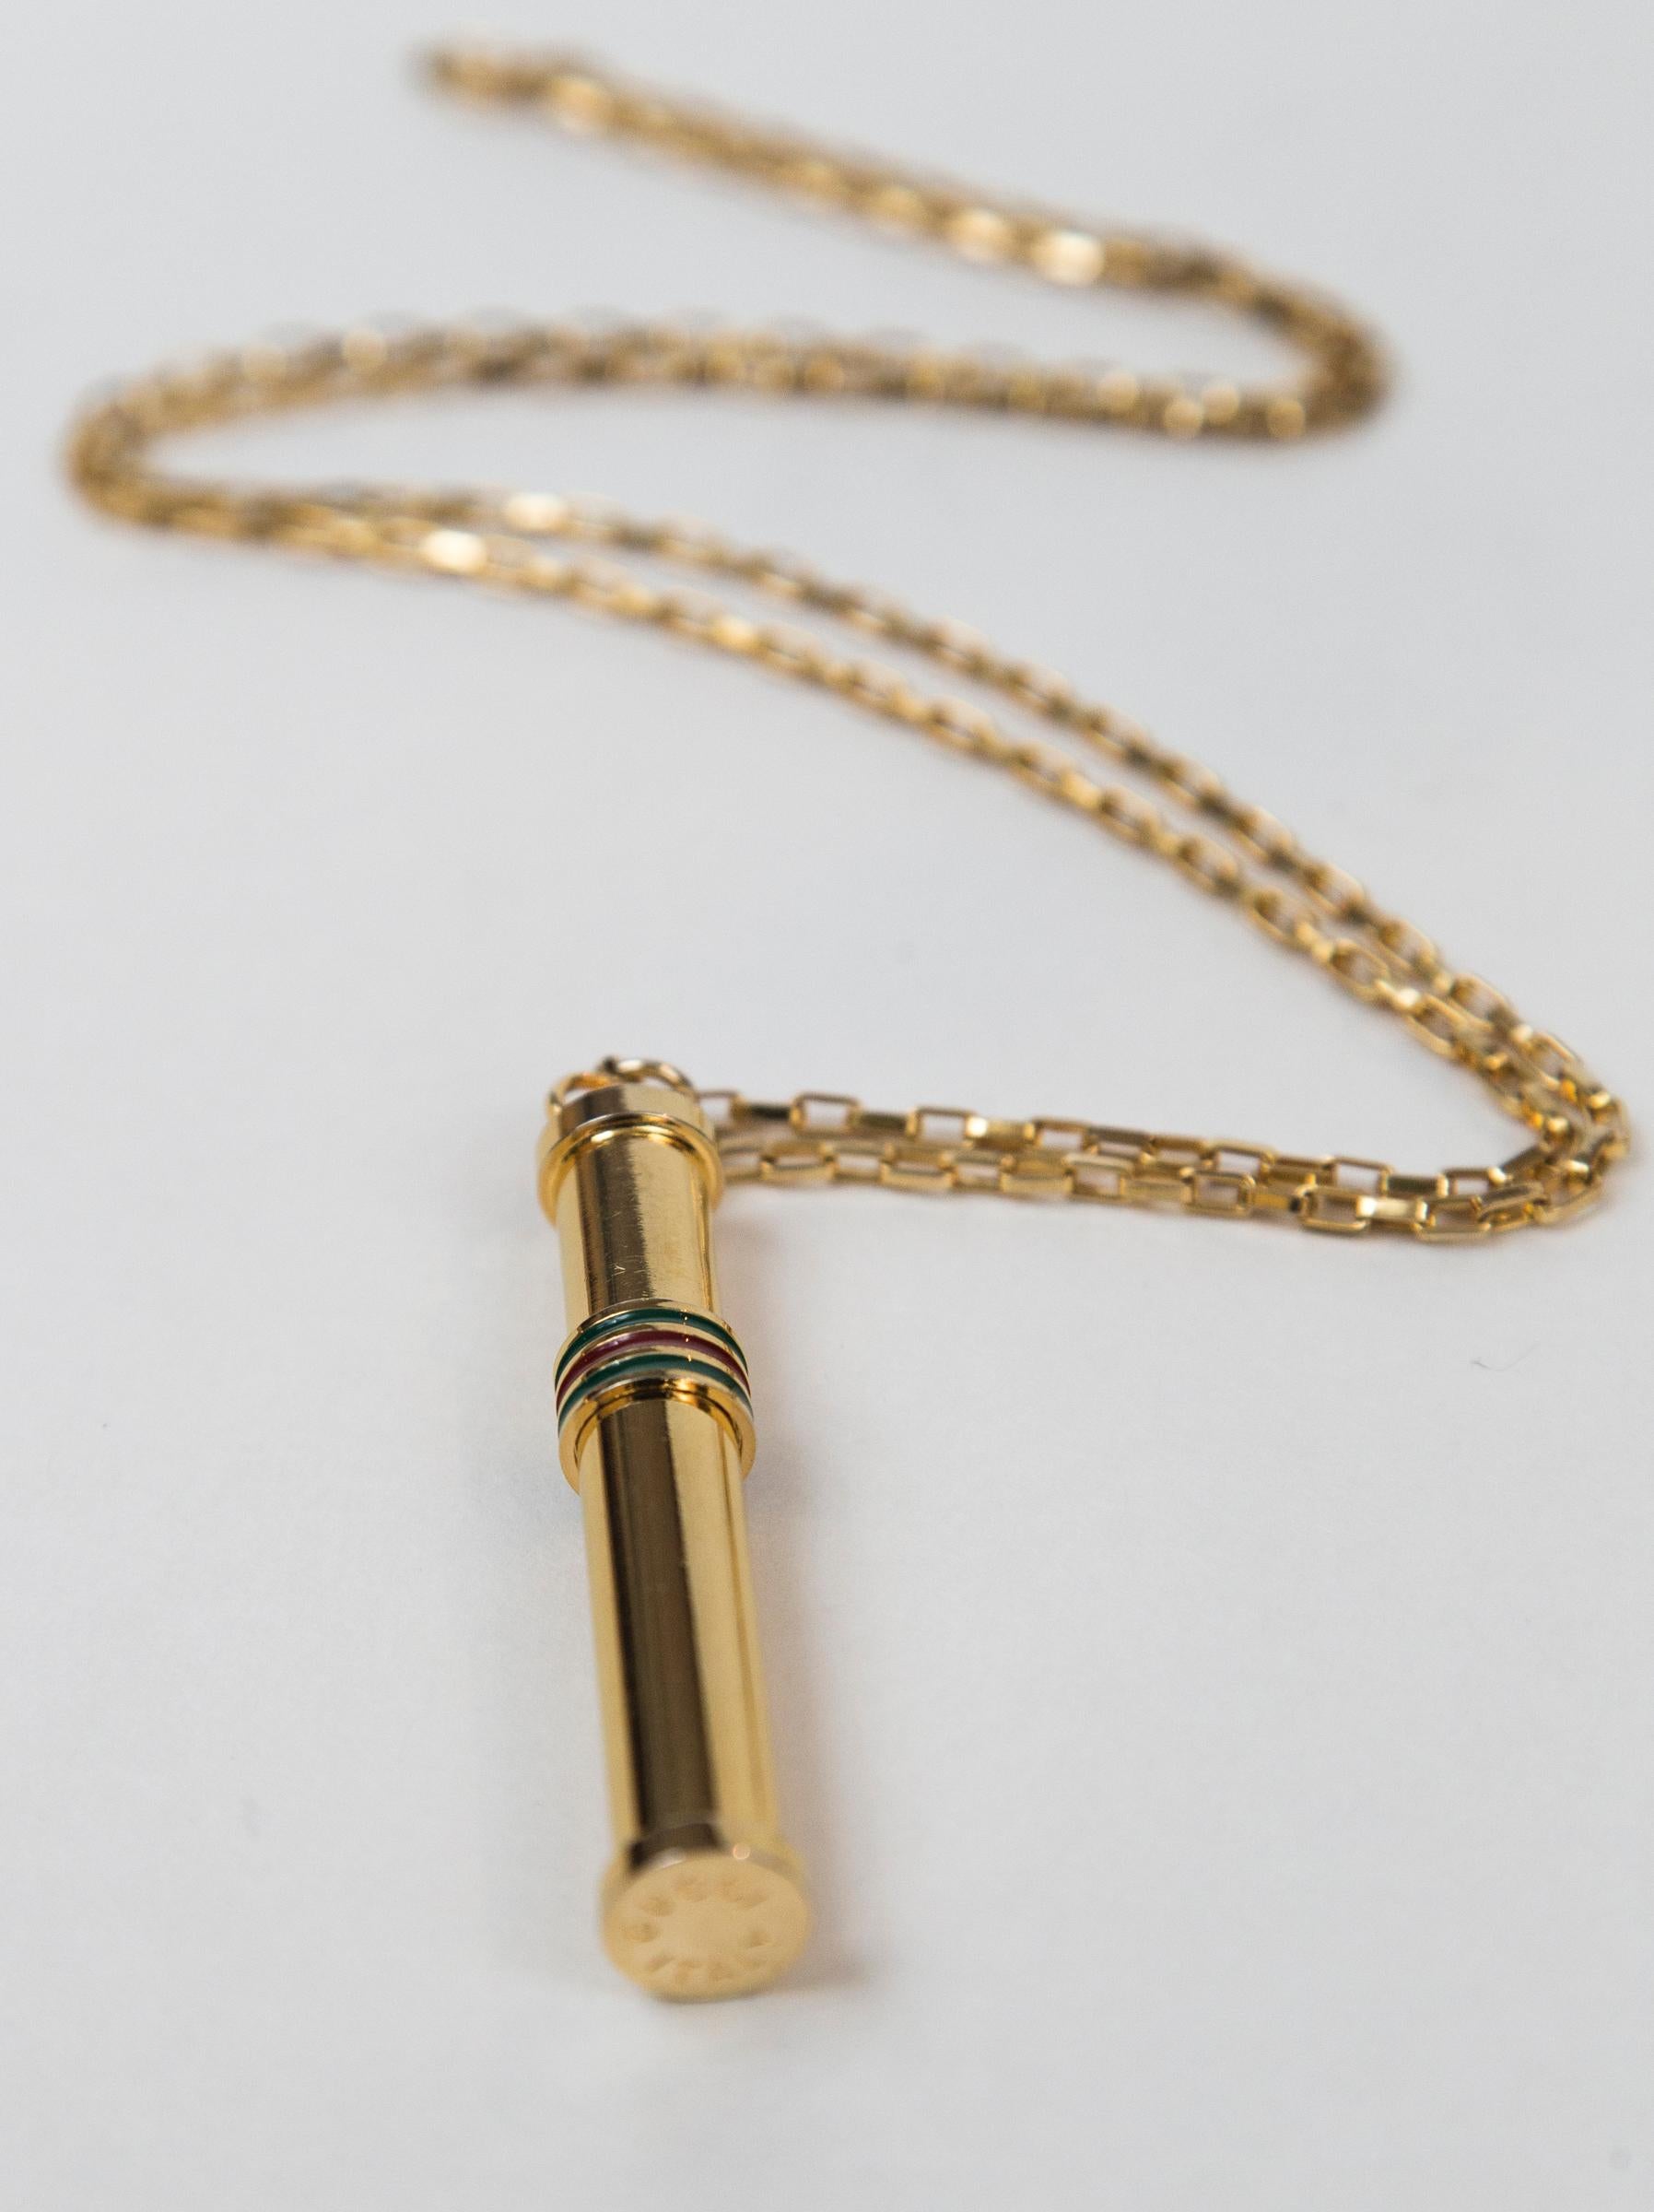 Women's or Men's Gucci Gold Perfume Stick Necklace